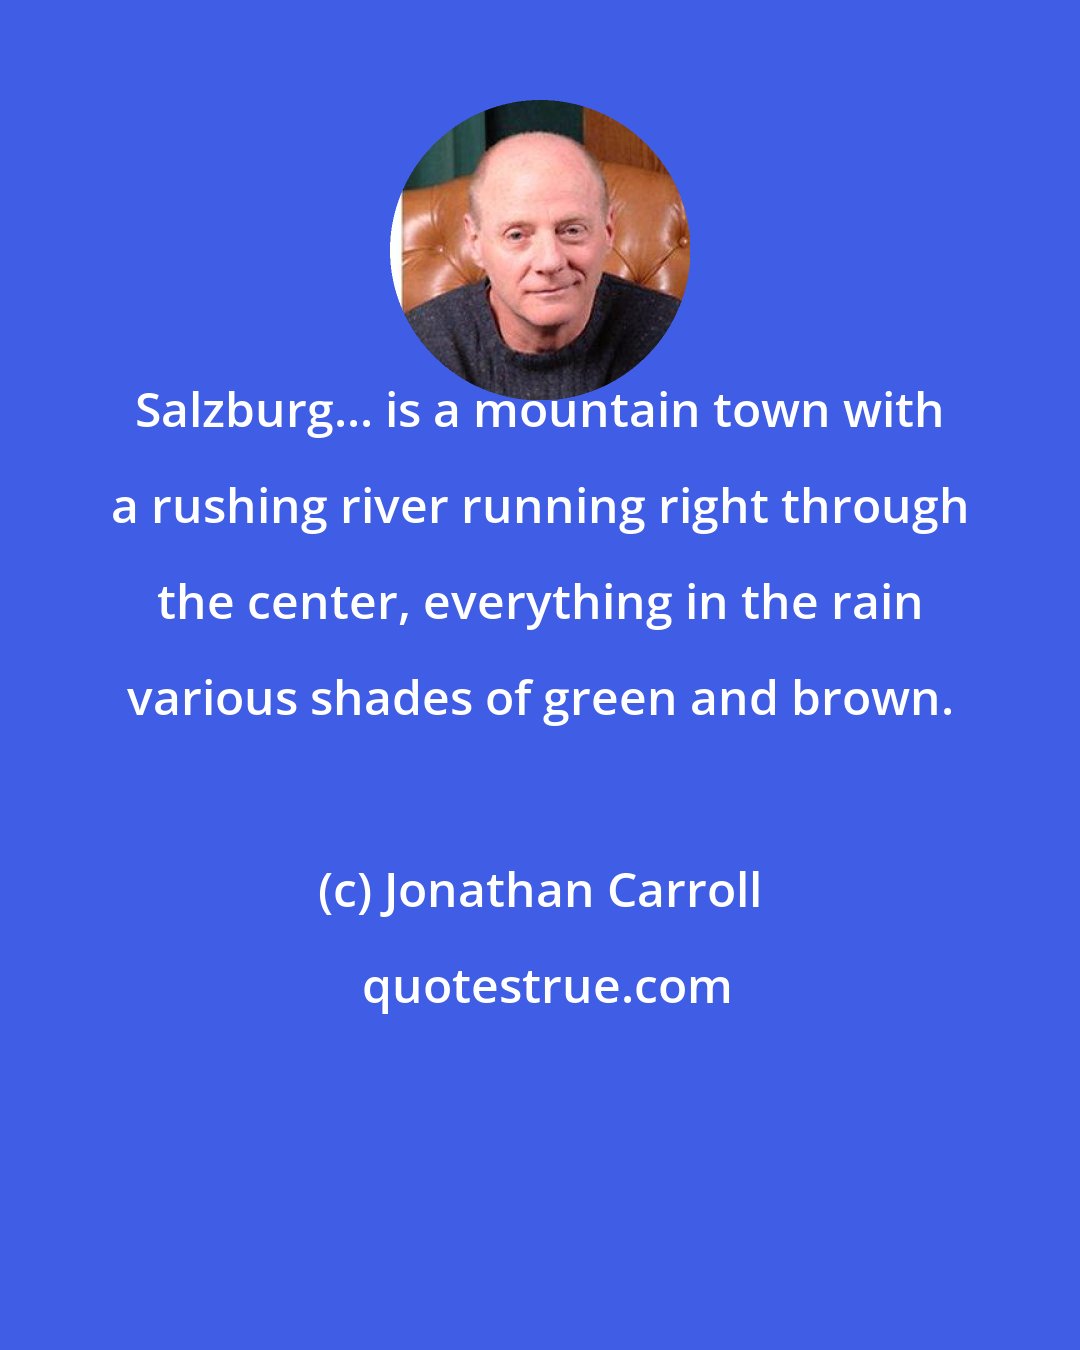 Jonathan Carroll: Salzburg... is a mountain town with a rushing river running right through the center, everything in the rain various shades of green and brown.